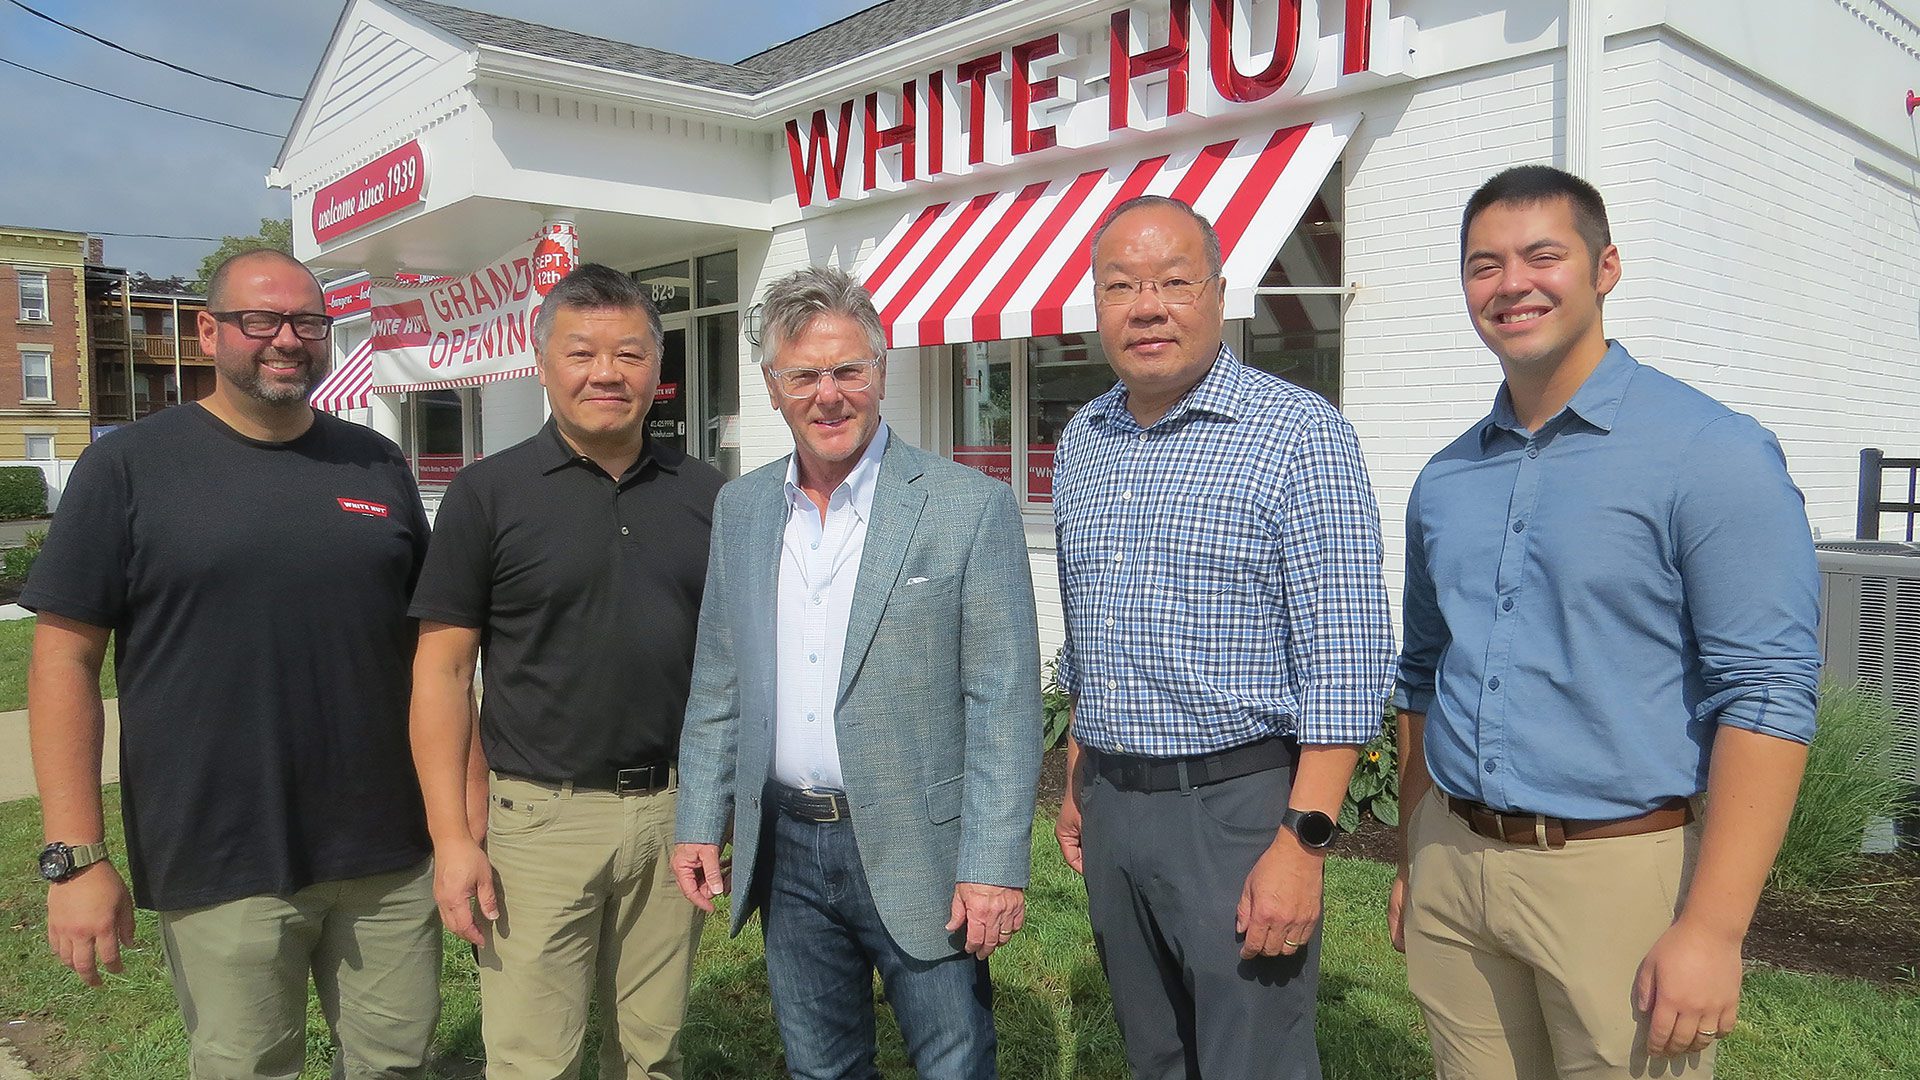 the latest White Hut location in Holyoke